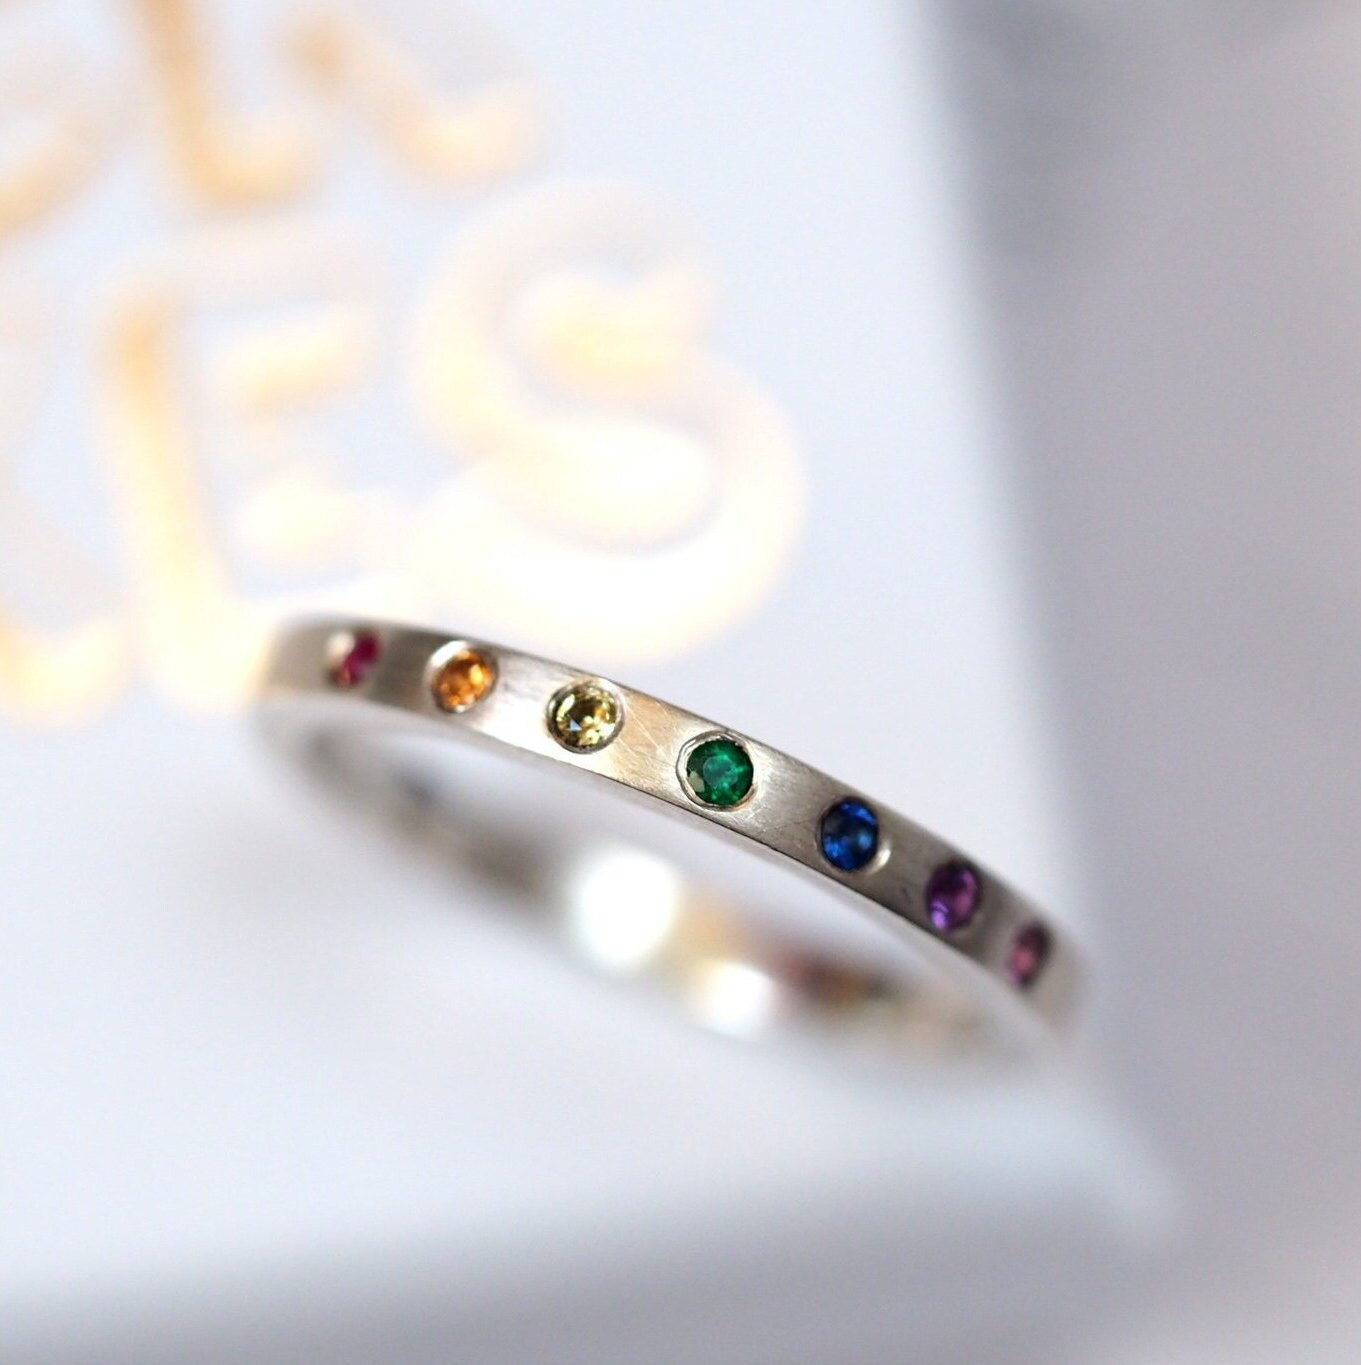 Skinny Rainbow Band - Recycled Sterling Silver and Precious Stones